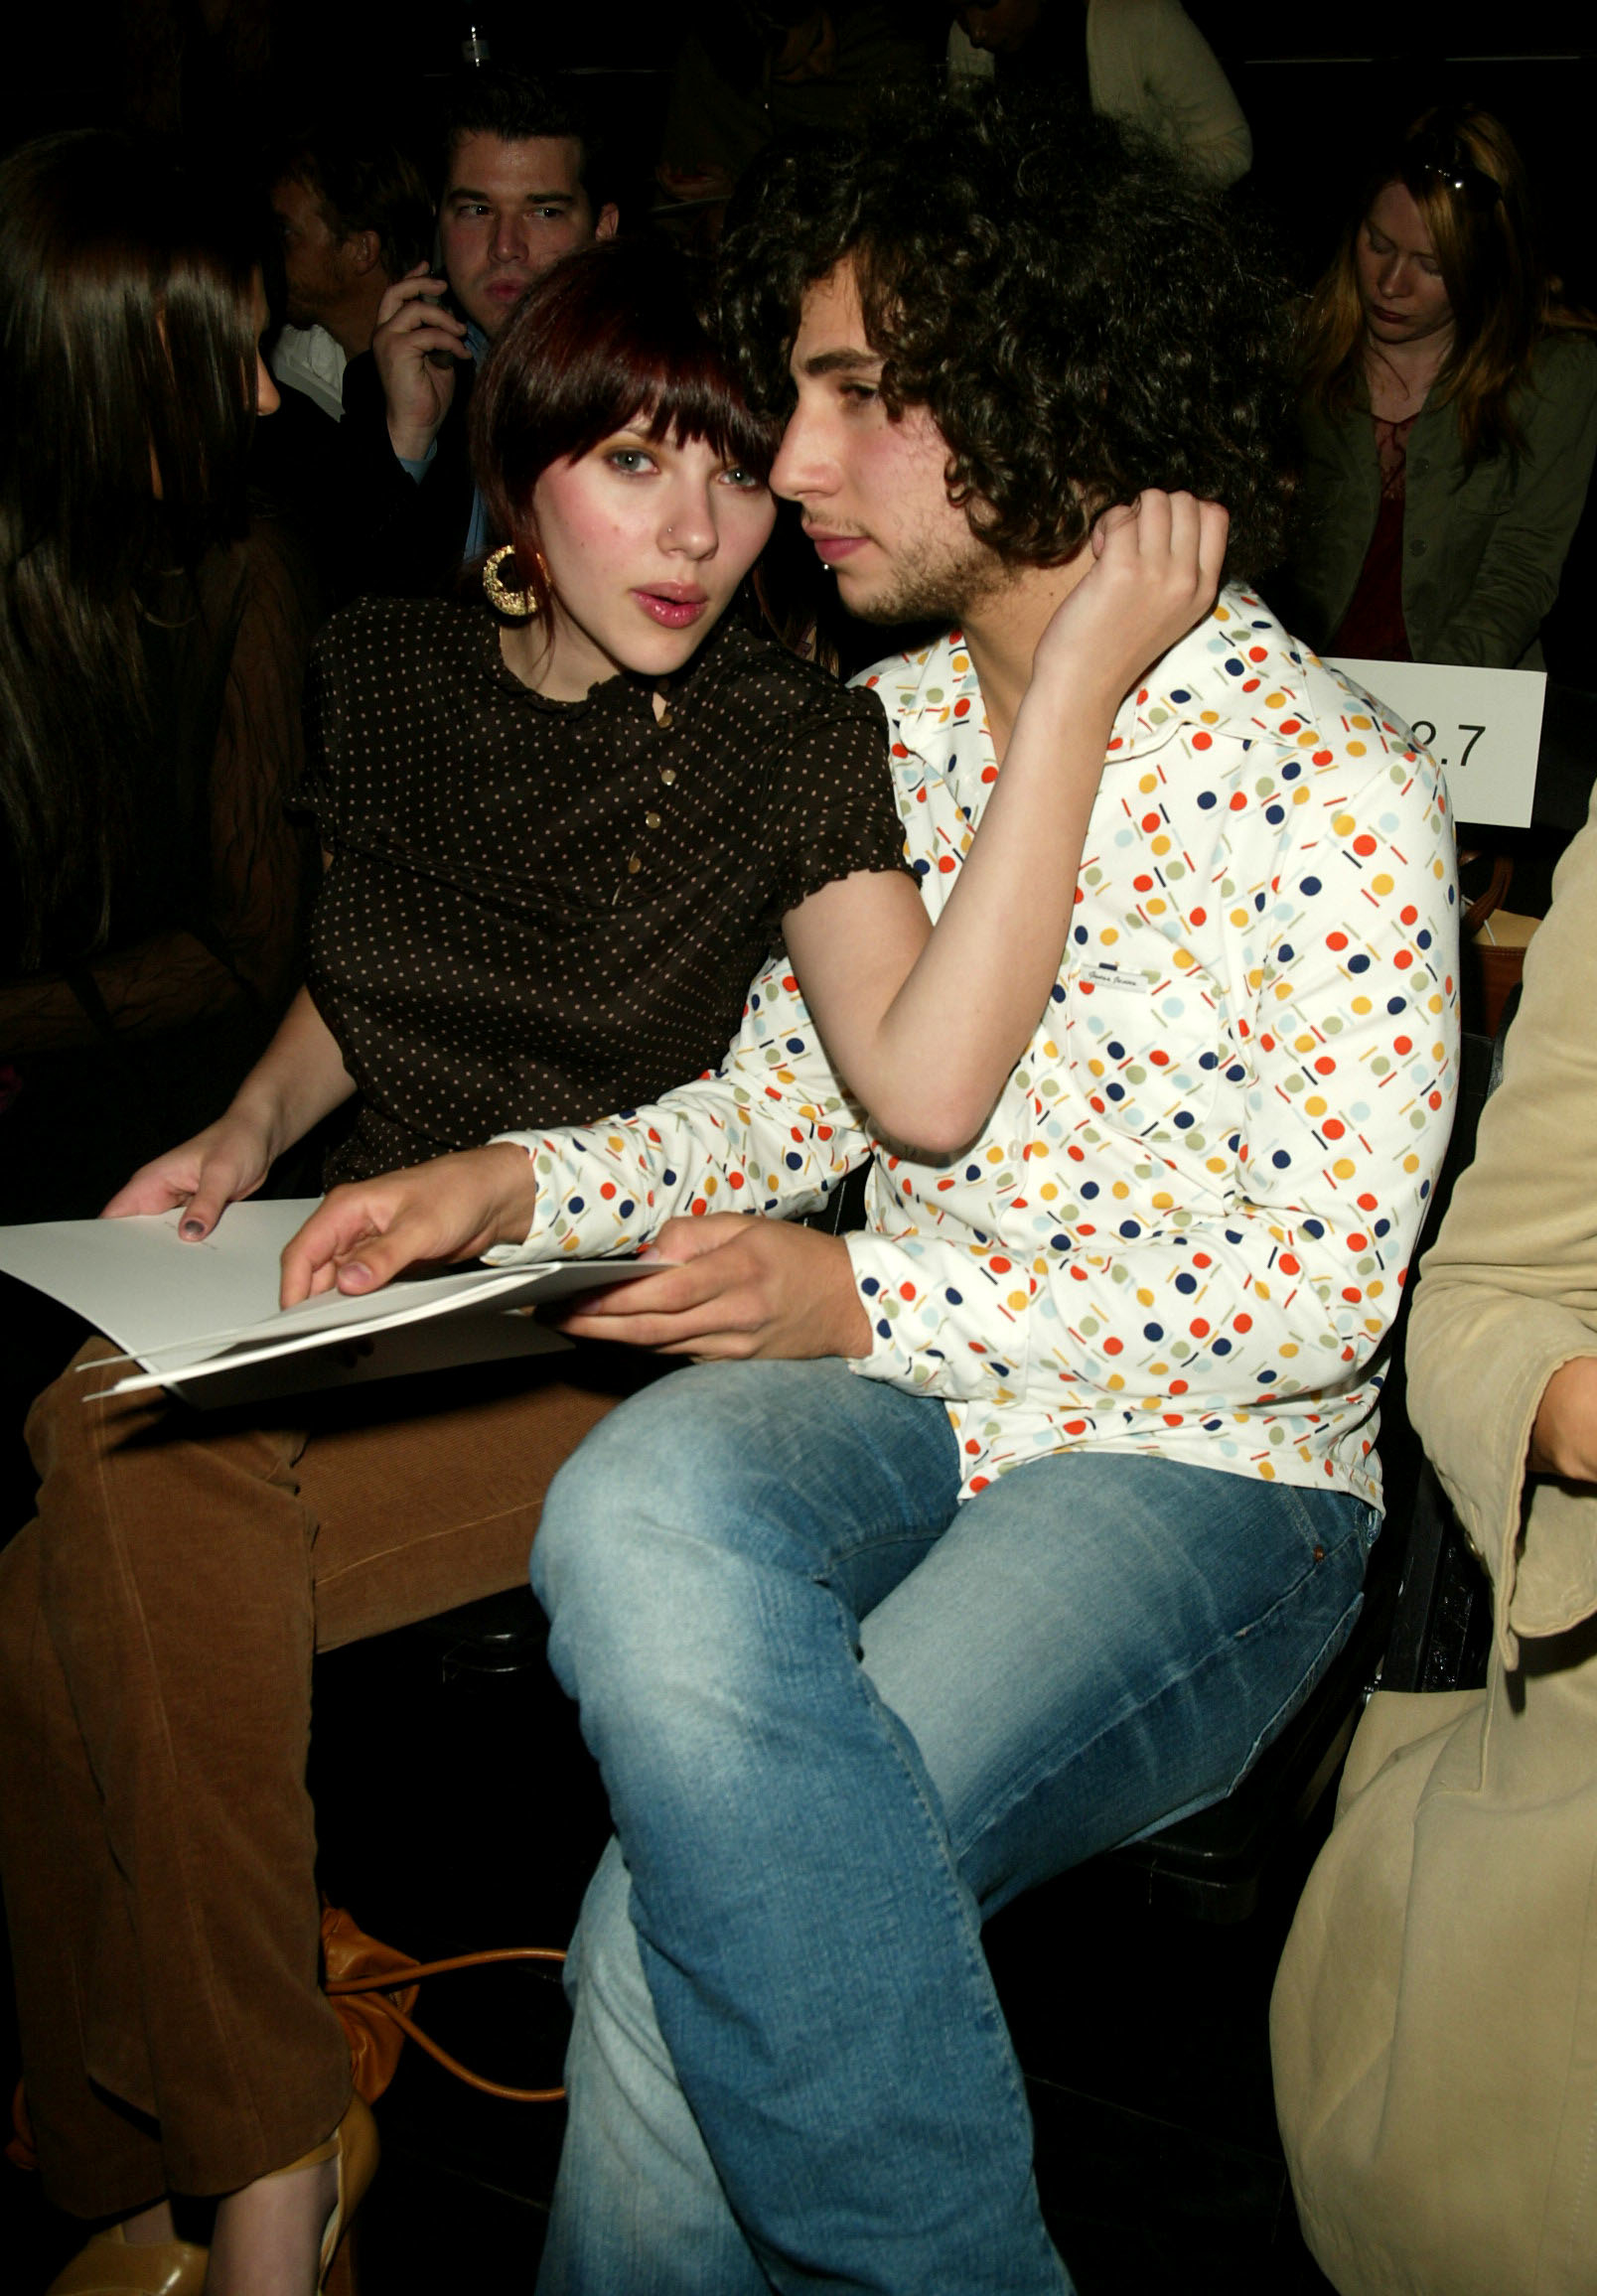 Scarlett and Jack seated together, she in a patterned top and corduroys and he in a printed shirt and jeans